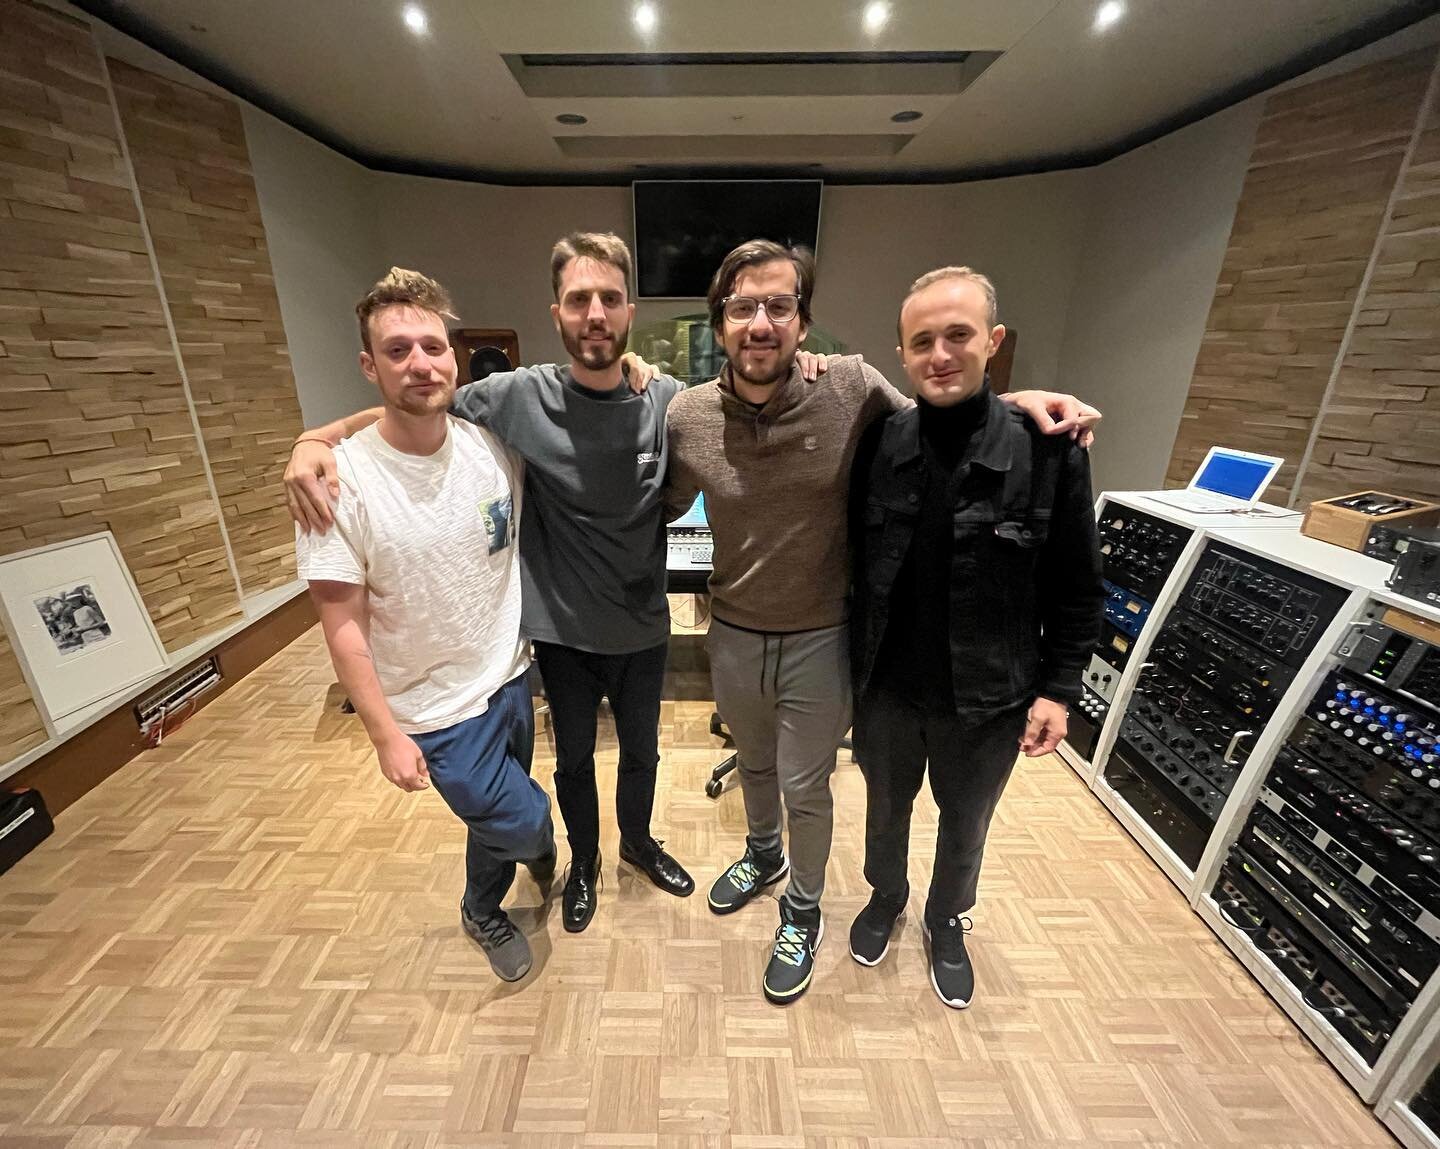 Had a great time on the road with my brothers @gchakarji @alonbenjamini @bassaloni  can&rsquo;t wait to share with you the new album we recorded. 🎶
Thank you again to Ren&eacute; Hess for putting all of this together! 🙏
#music #band #tour #livemusi